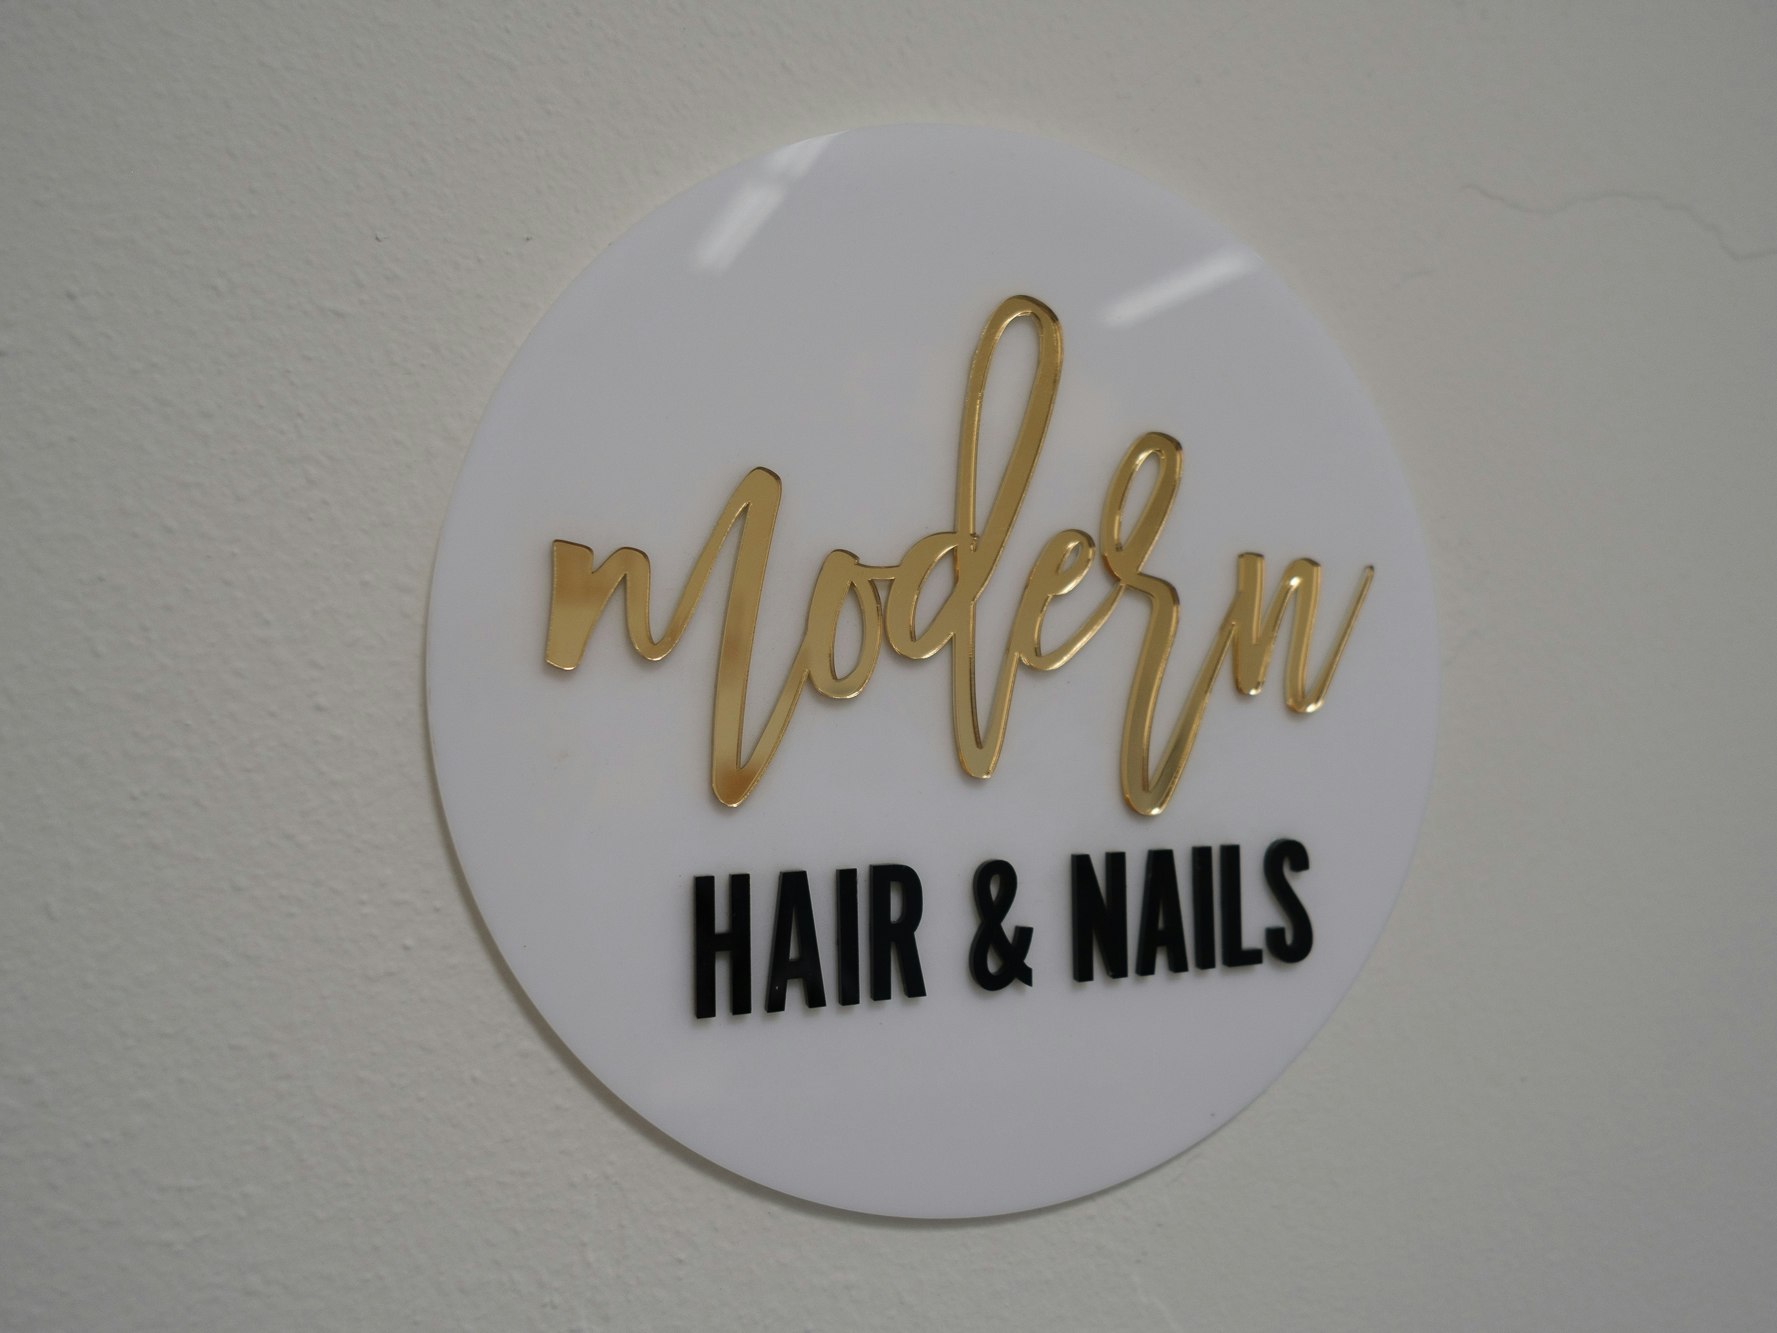 Round acrylic sign in white and gold mirro